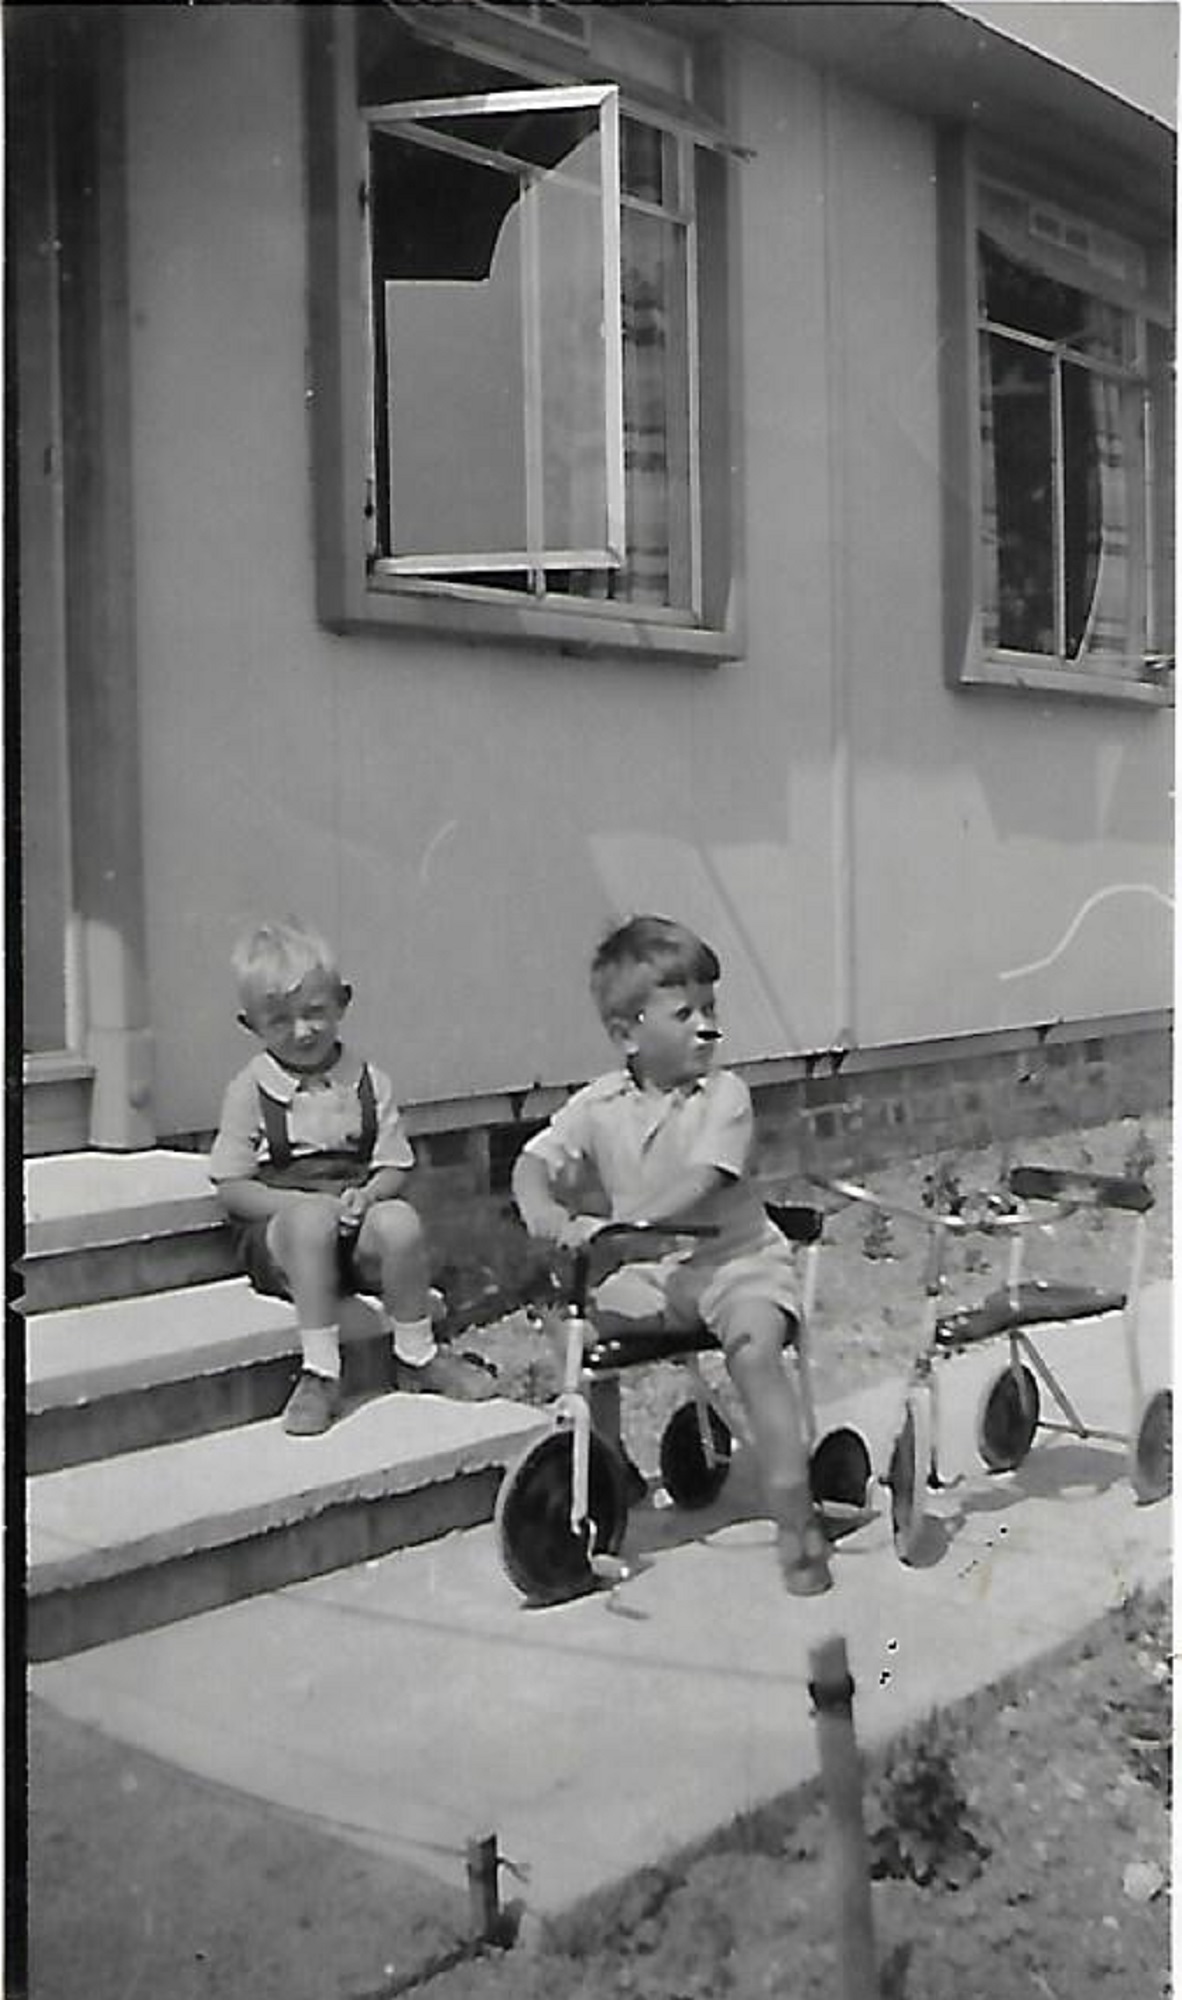 Pat on the tricycle and his friend John on the prefab step, Douglas Road, Lenham